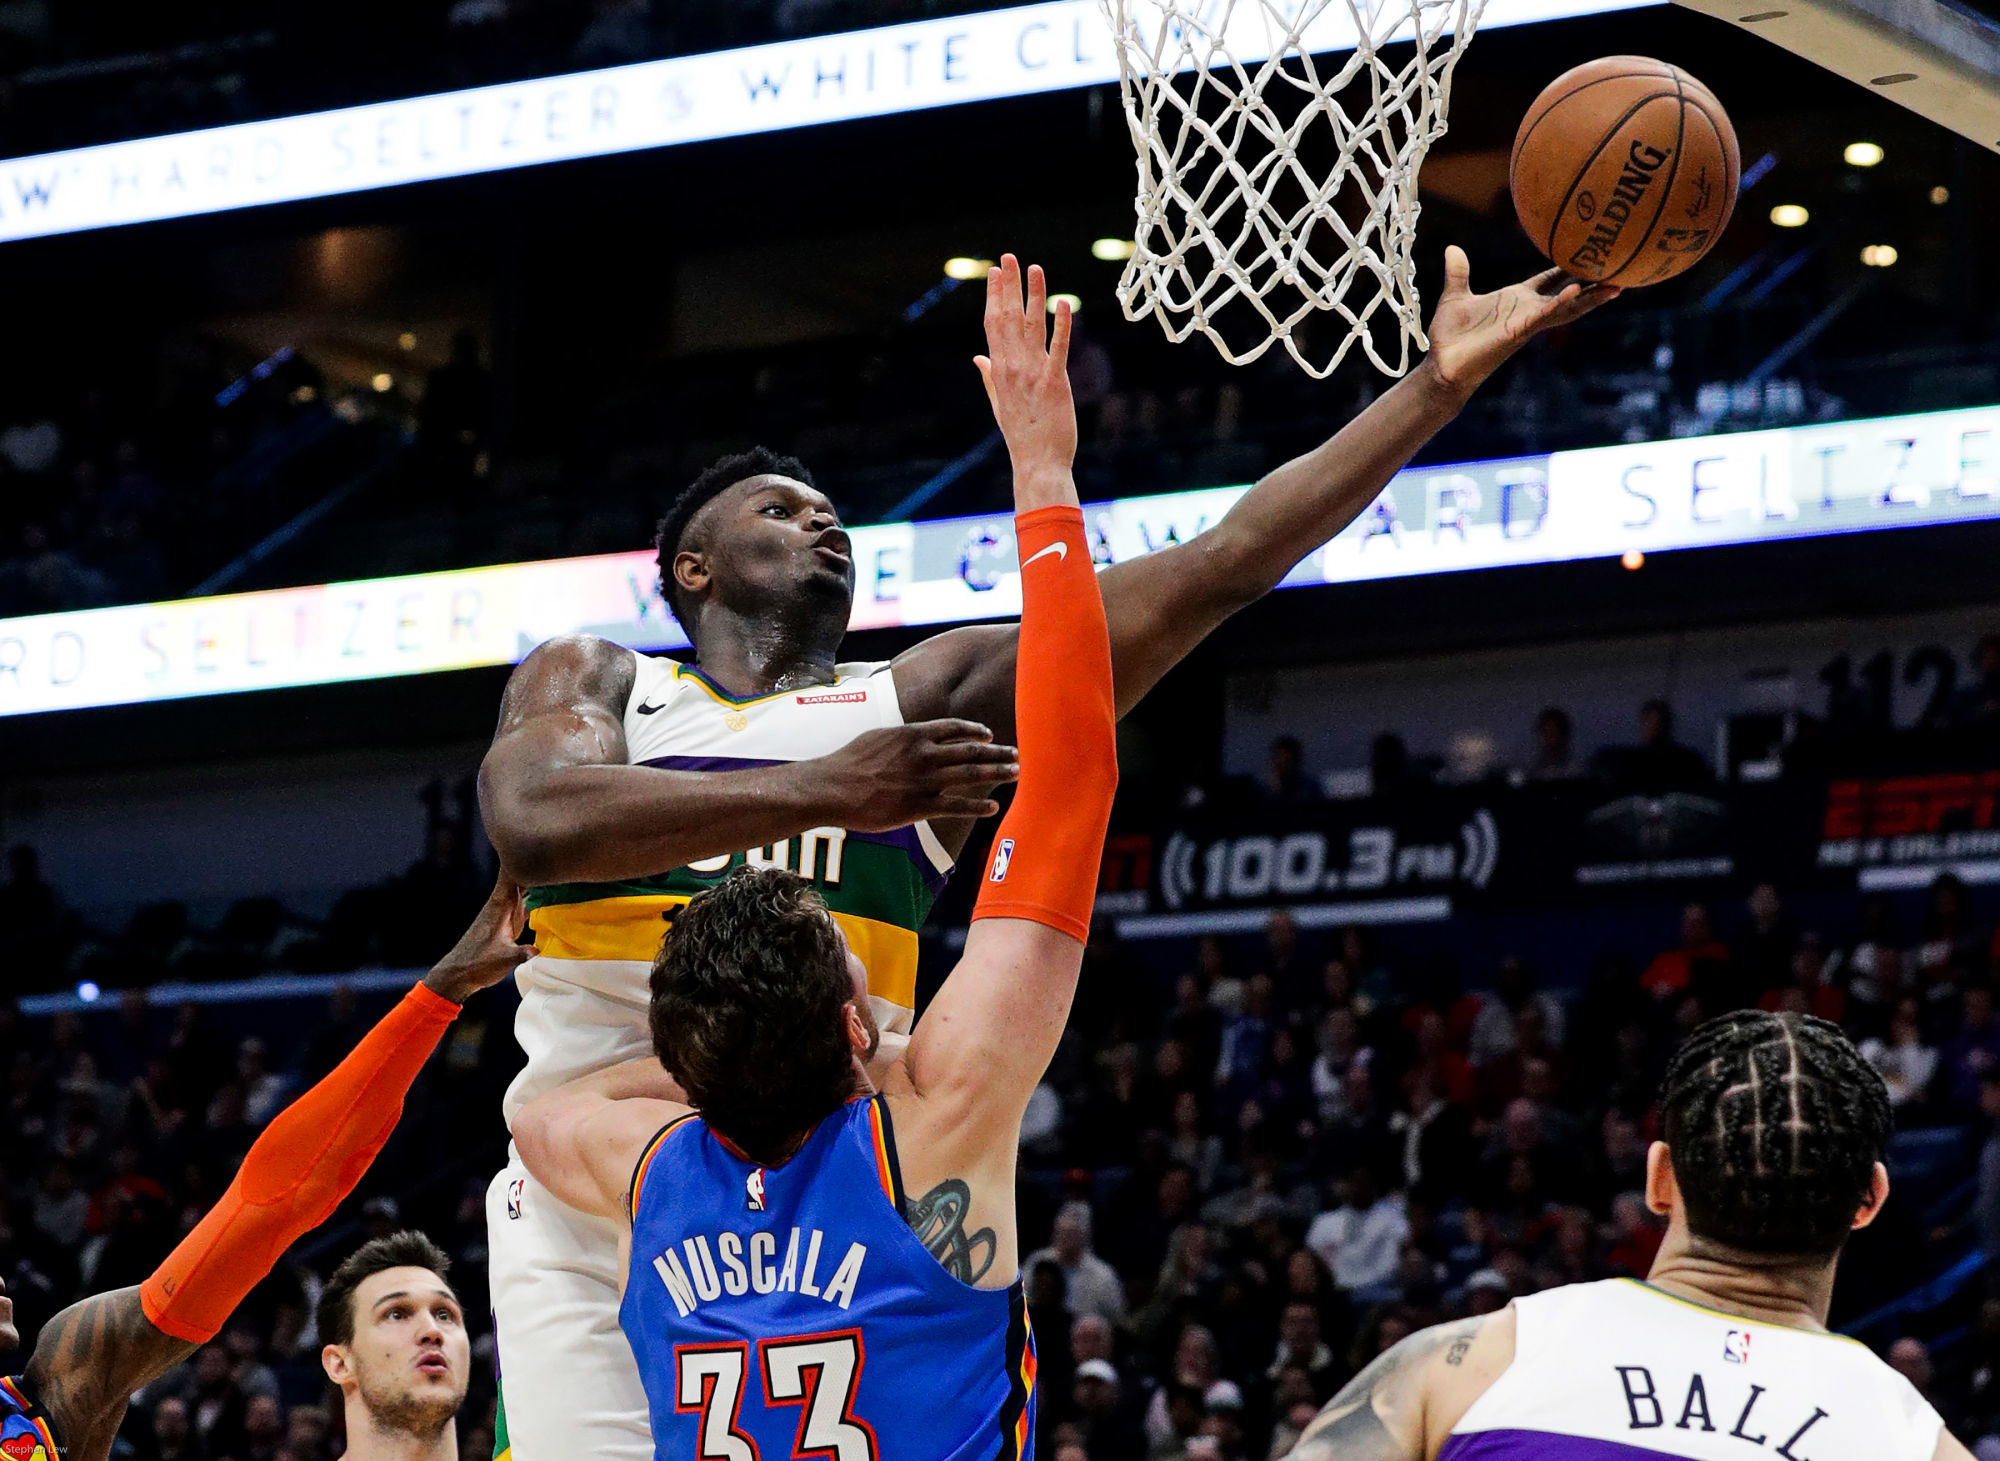 Feb 13, 2020; New Orleans, Louisiana, USA;  New Orleans Pelicans forward Zion Williamson (1) drives to the basket against Oklahoma City Thunder forward Mike Muscala (33) during the second half at Smoothie King Center. Mandatory Credit: Stephen Lew-USA TODAY Sports/Sipa USA 

Photo by Icon Sport - Zion WILLIAMSON - Mike MUSCALA - Smoothie King Center - Nouvelle Orleans (Etats Unis)